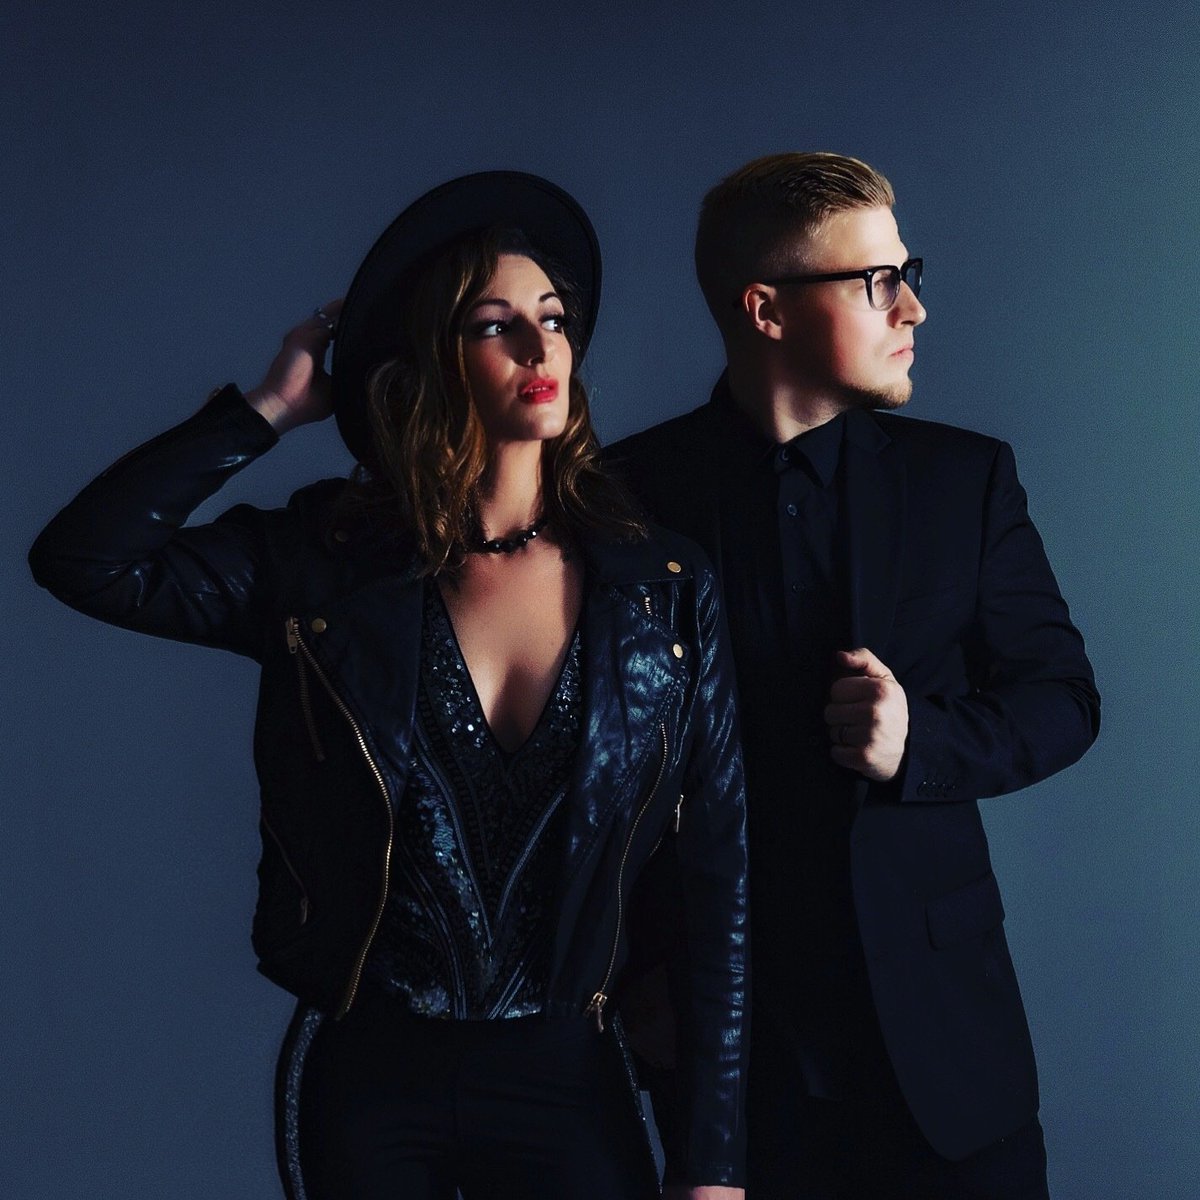 Swinging our moods around with their catchy sound to dance all night with, The Handsome Bandit guides us into a world filled with potential for one or more sweet kisses on the piano-packed Believe You Me. #band #BelieveYouMe #Chicago #Live #Pop #rock

anrfactory.com/?p=55498